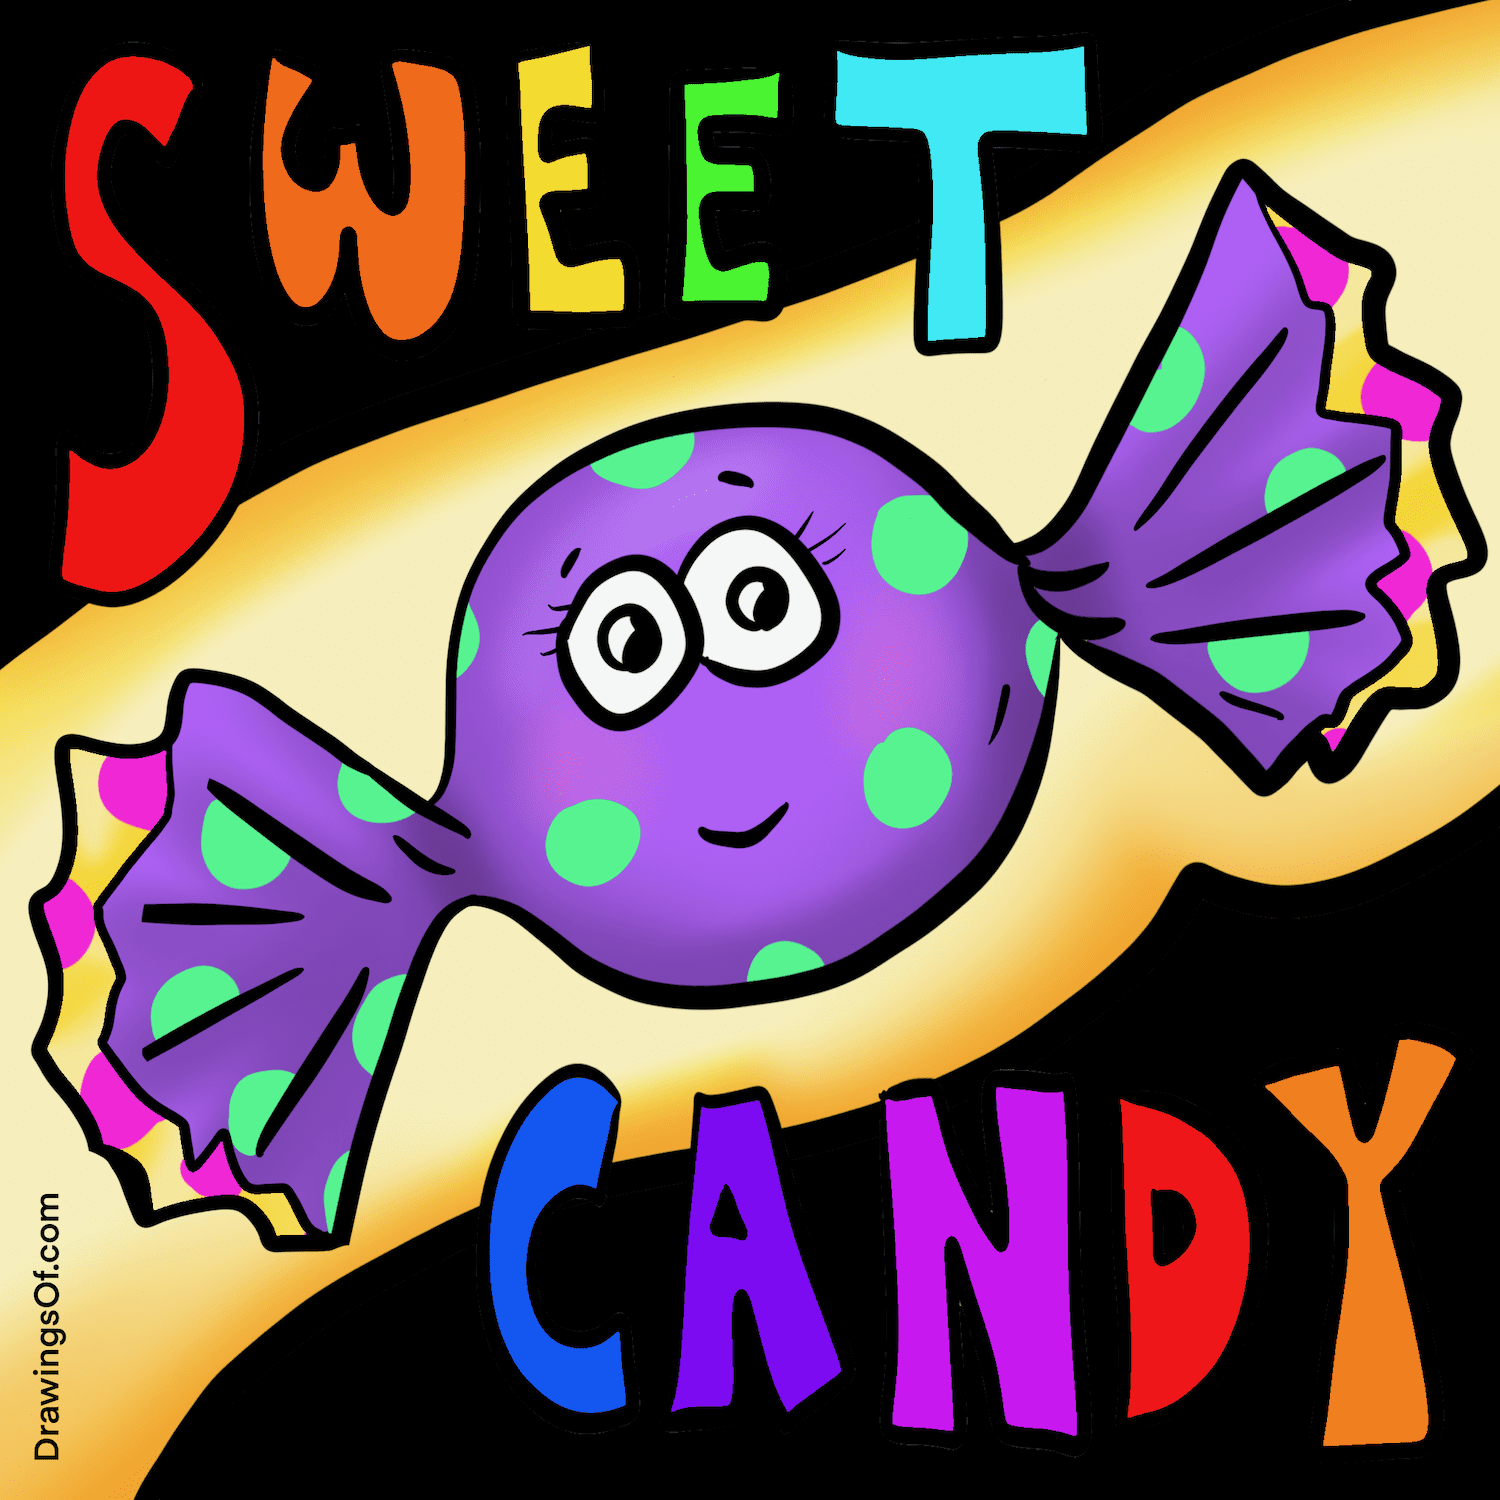 how to draw candy